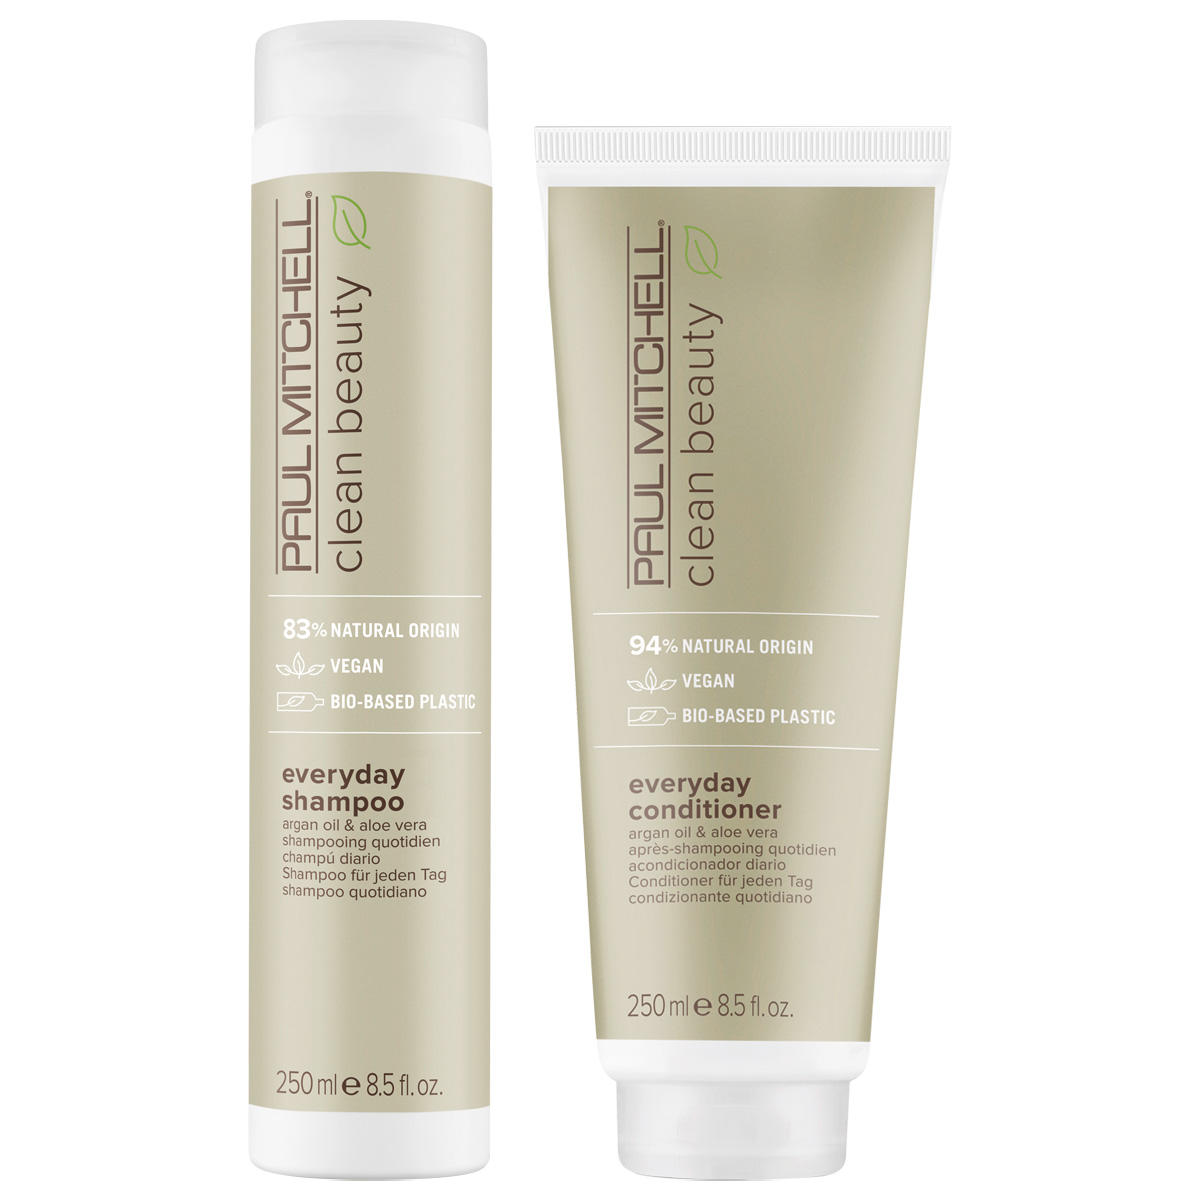 Paul Mitchell Clean Beauty Everyday Set  - 1